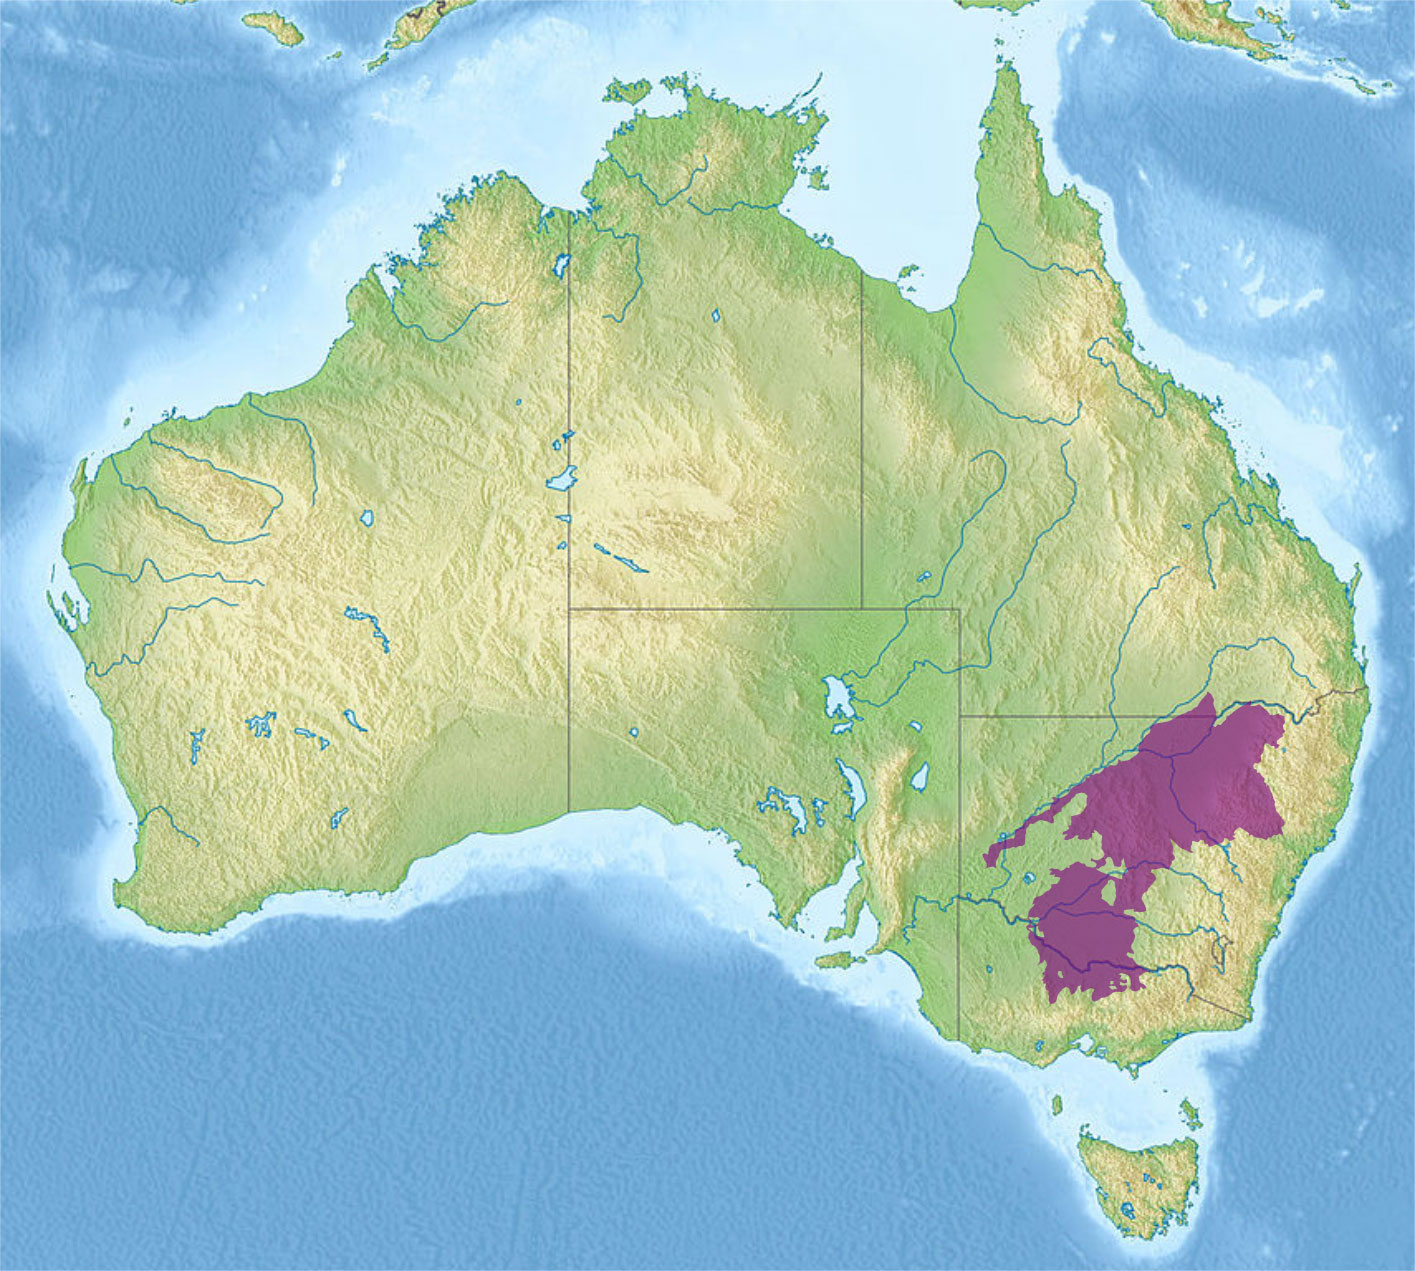 Map of Australia with the temperate savanna region shaded purple. This region is an irregularly shaped region in southeastern Australia.